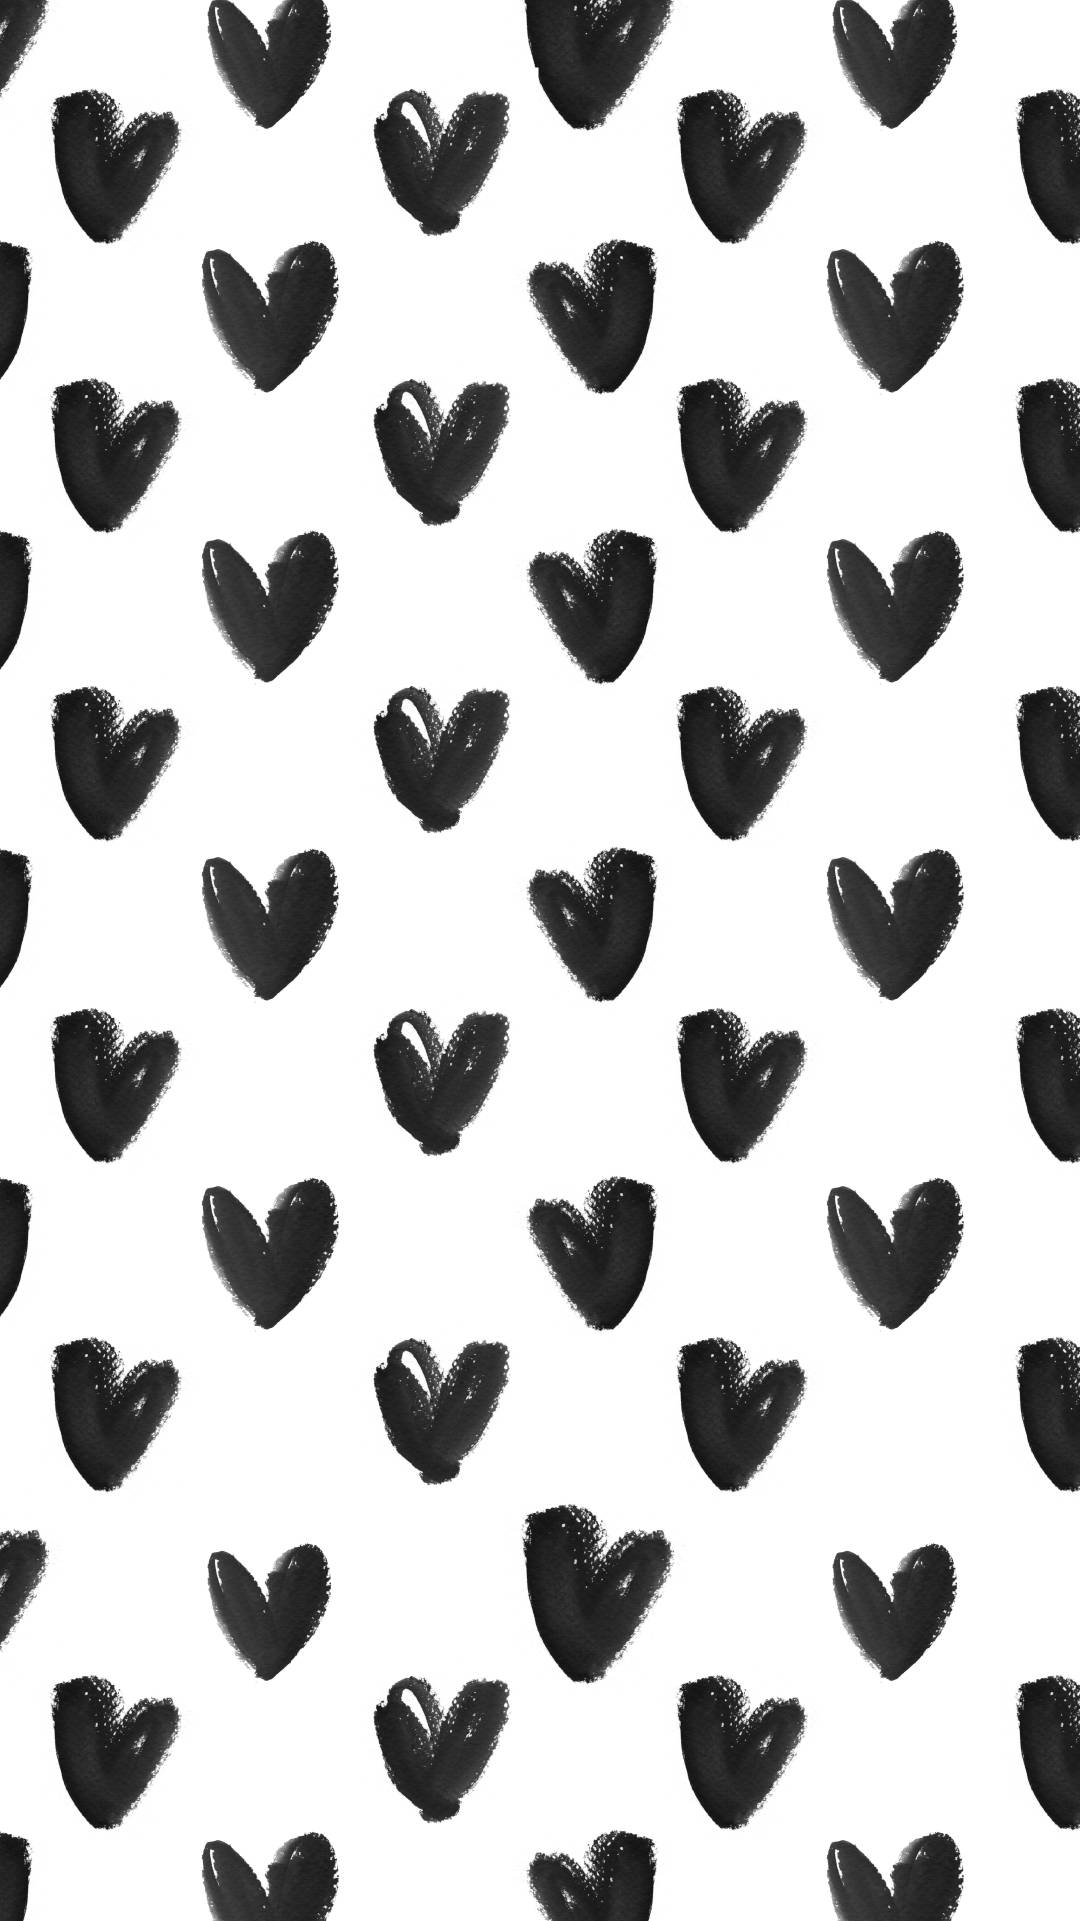 Download Love Black And White Doodle Heart Pattern Wallpaper | Wallpapers .com